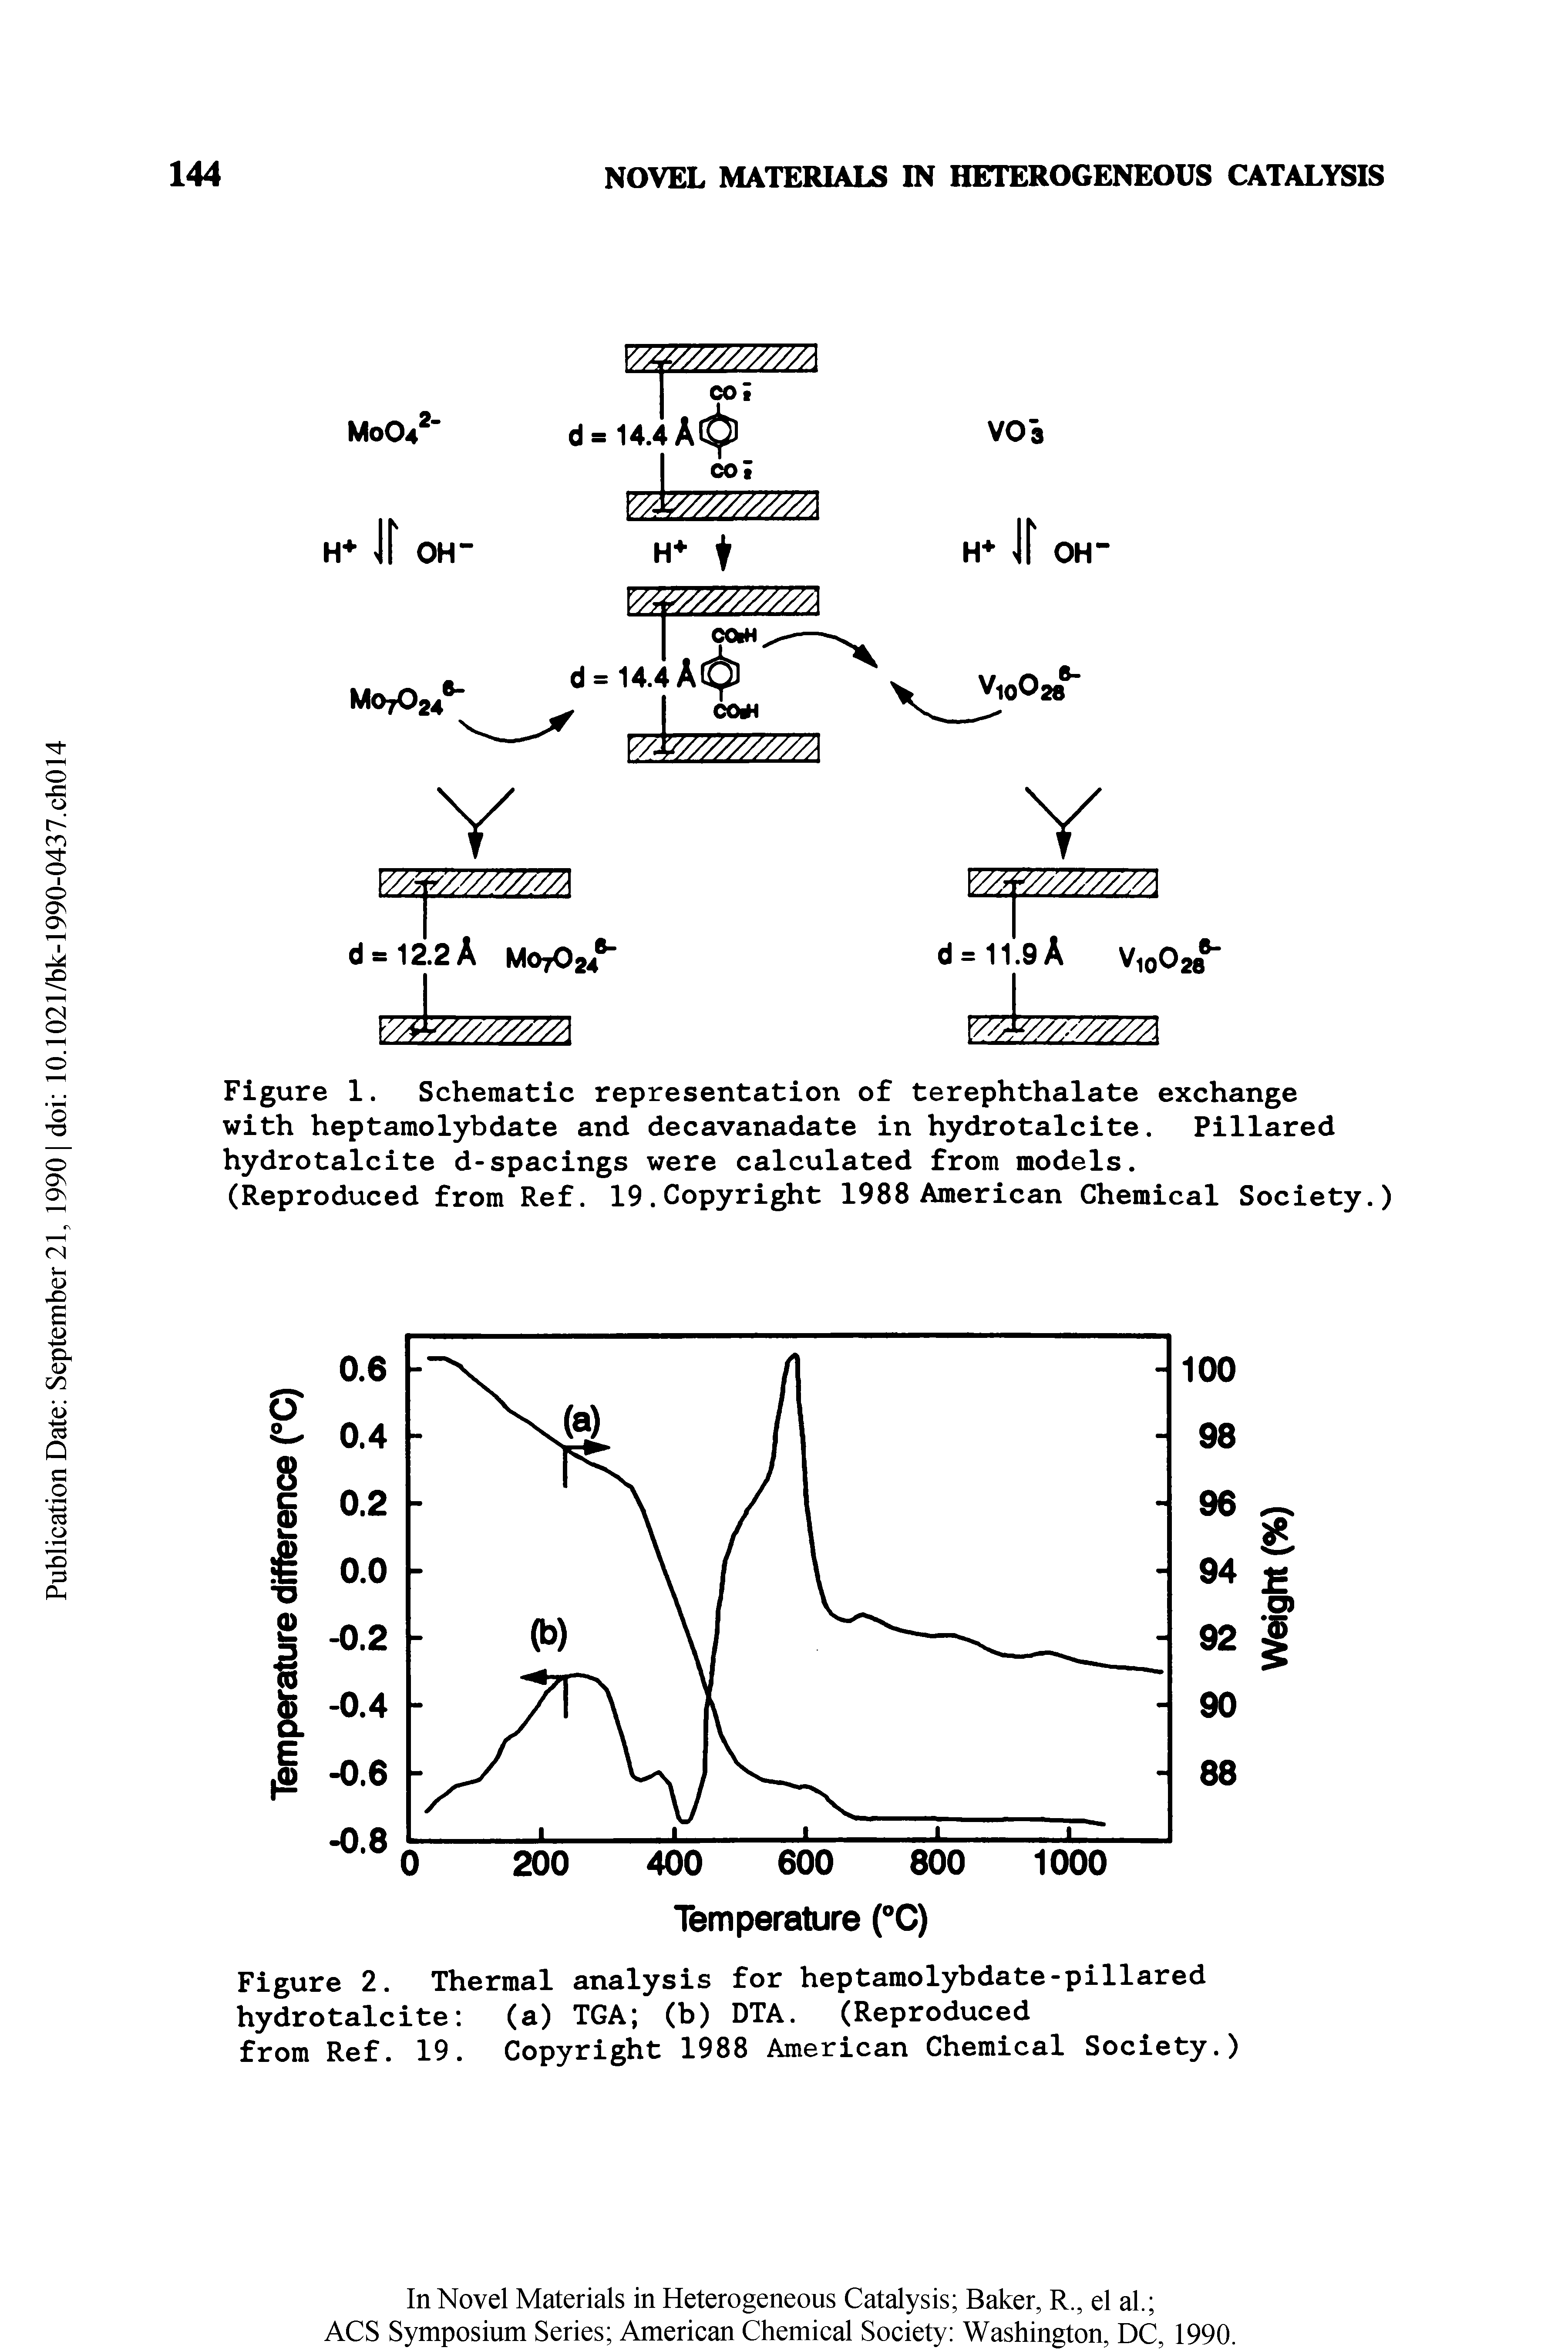 Figure 1. Schematic representation of terephthalate exchange with heptamolybdate and decavanadate in hydrotalcite. Pillared hydrotalcite d-spacings were calculated from models.